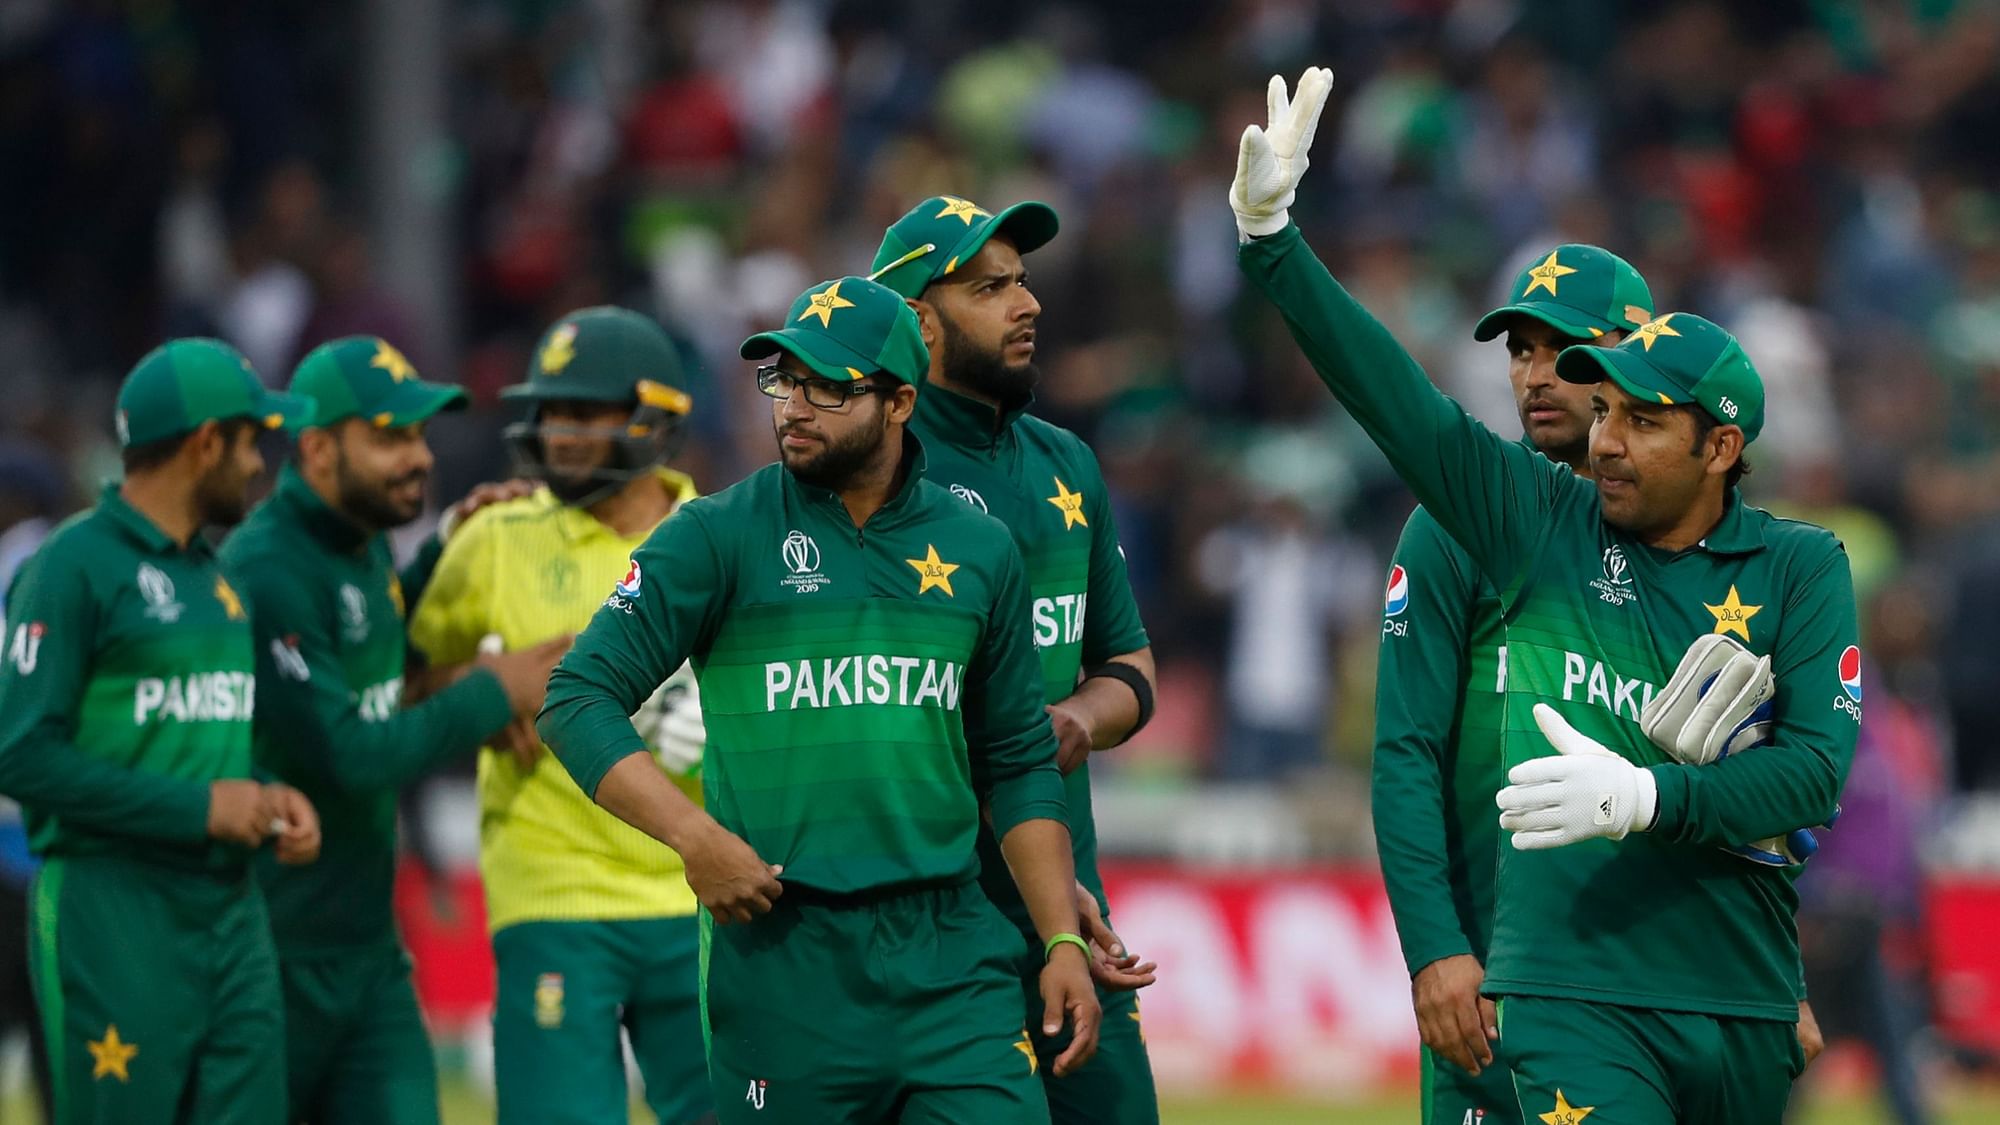 Watch highlights from Pakistan’s 49-run victory over South Africa in the 2019 ICC World Cup.